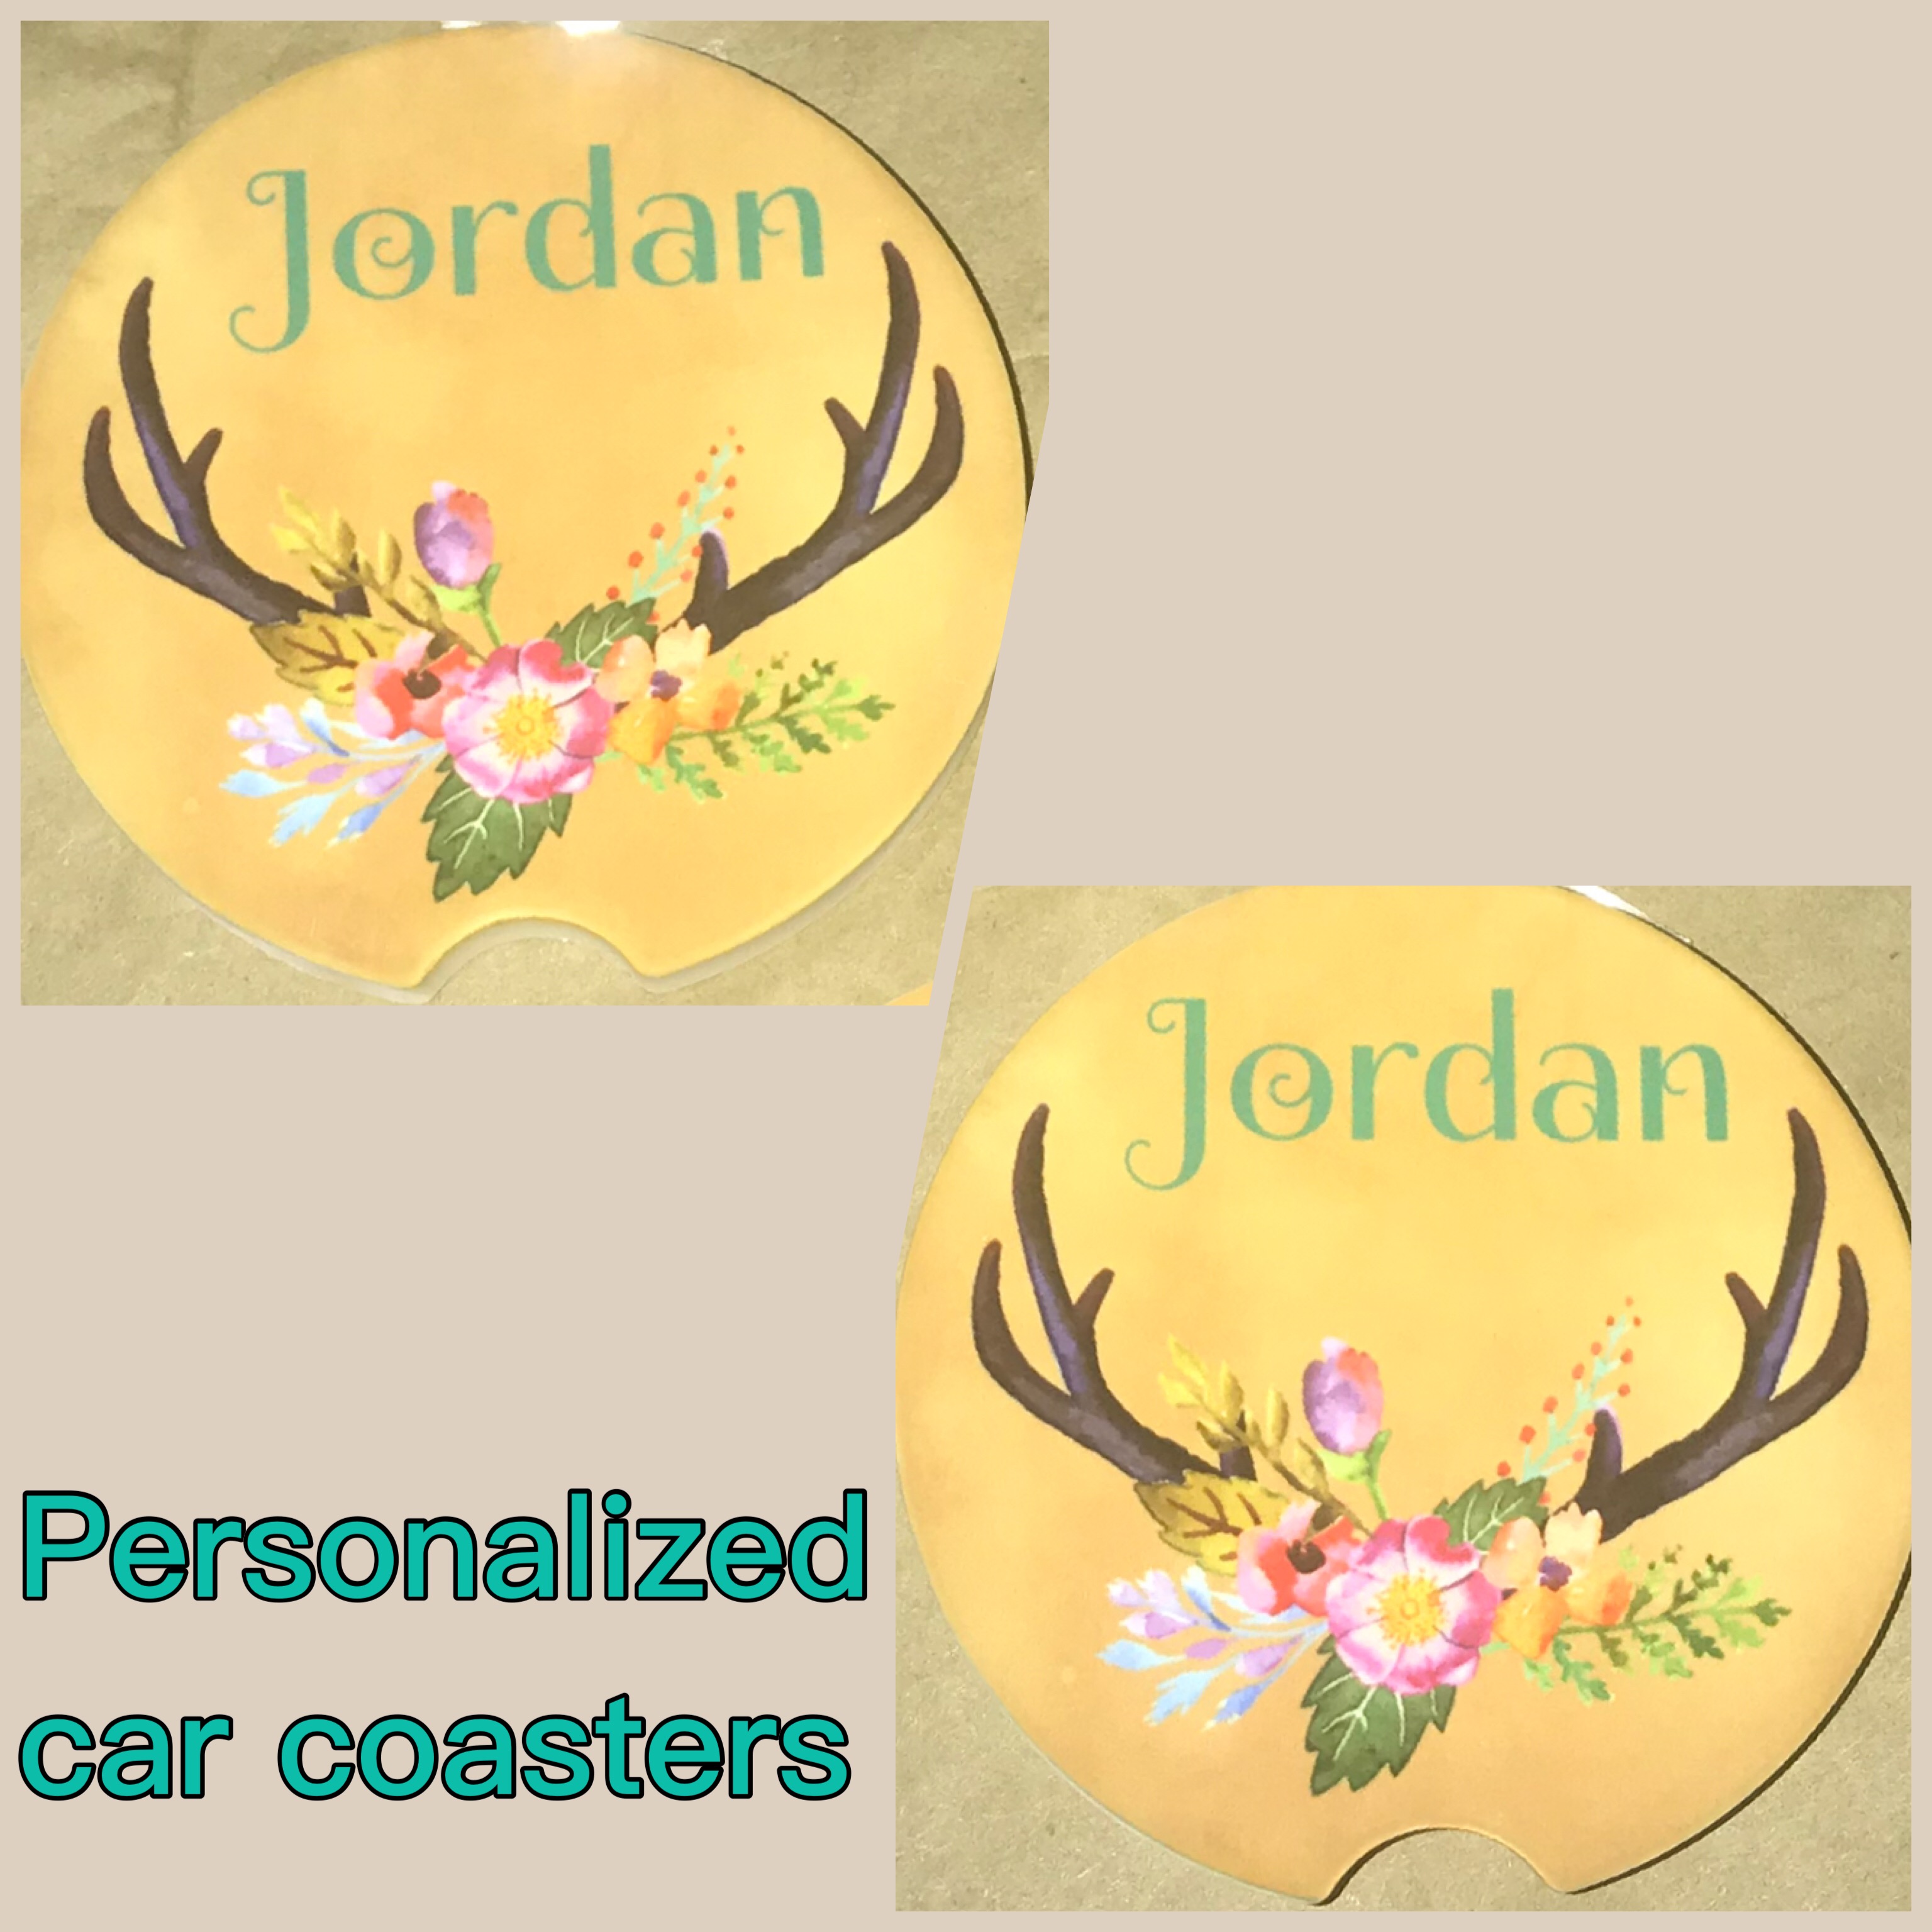 Sandstone coaster made with sublimation printing